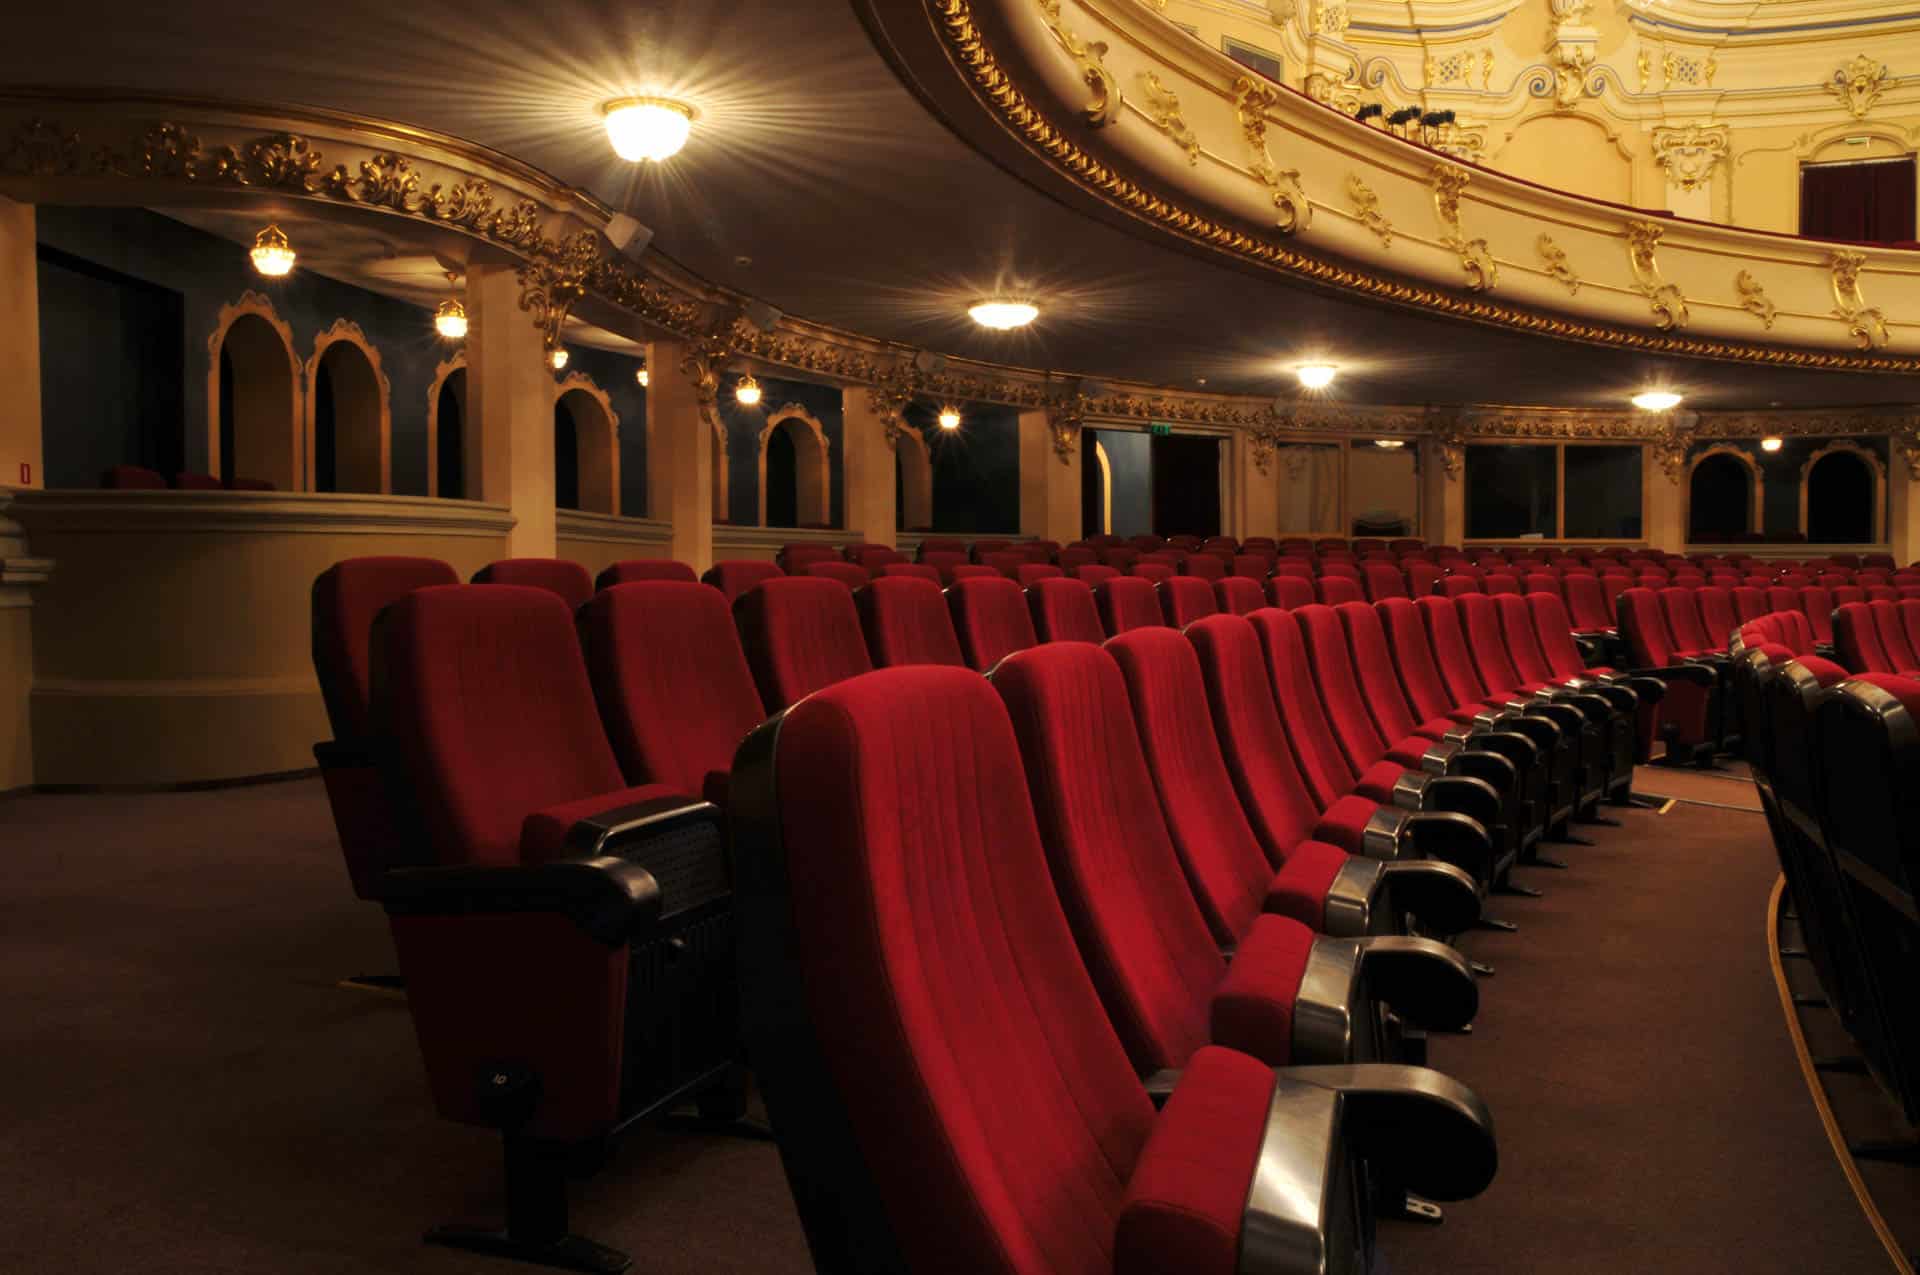 Theatre Seats Lined Within A Row